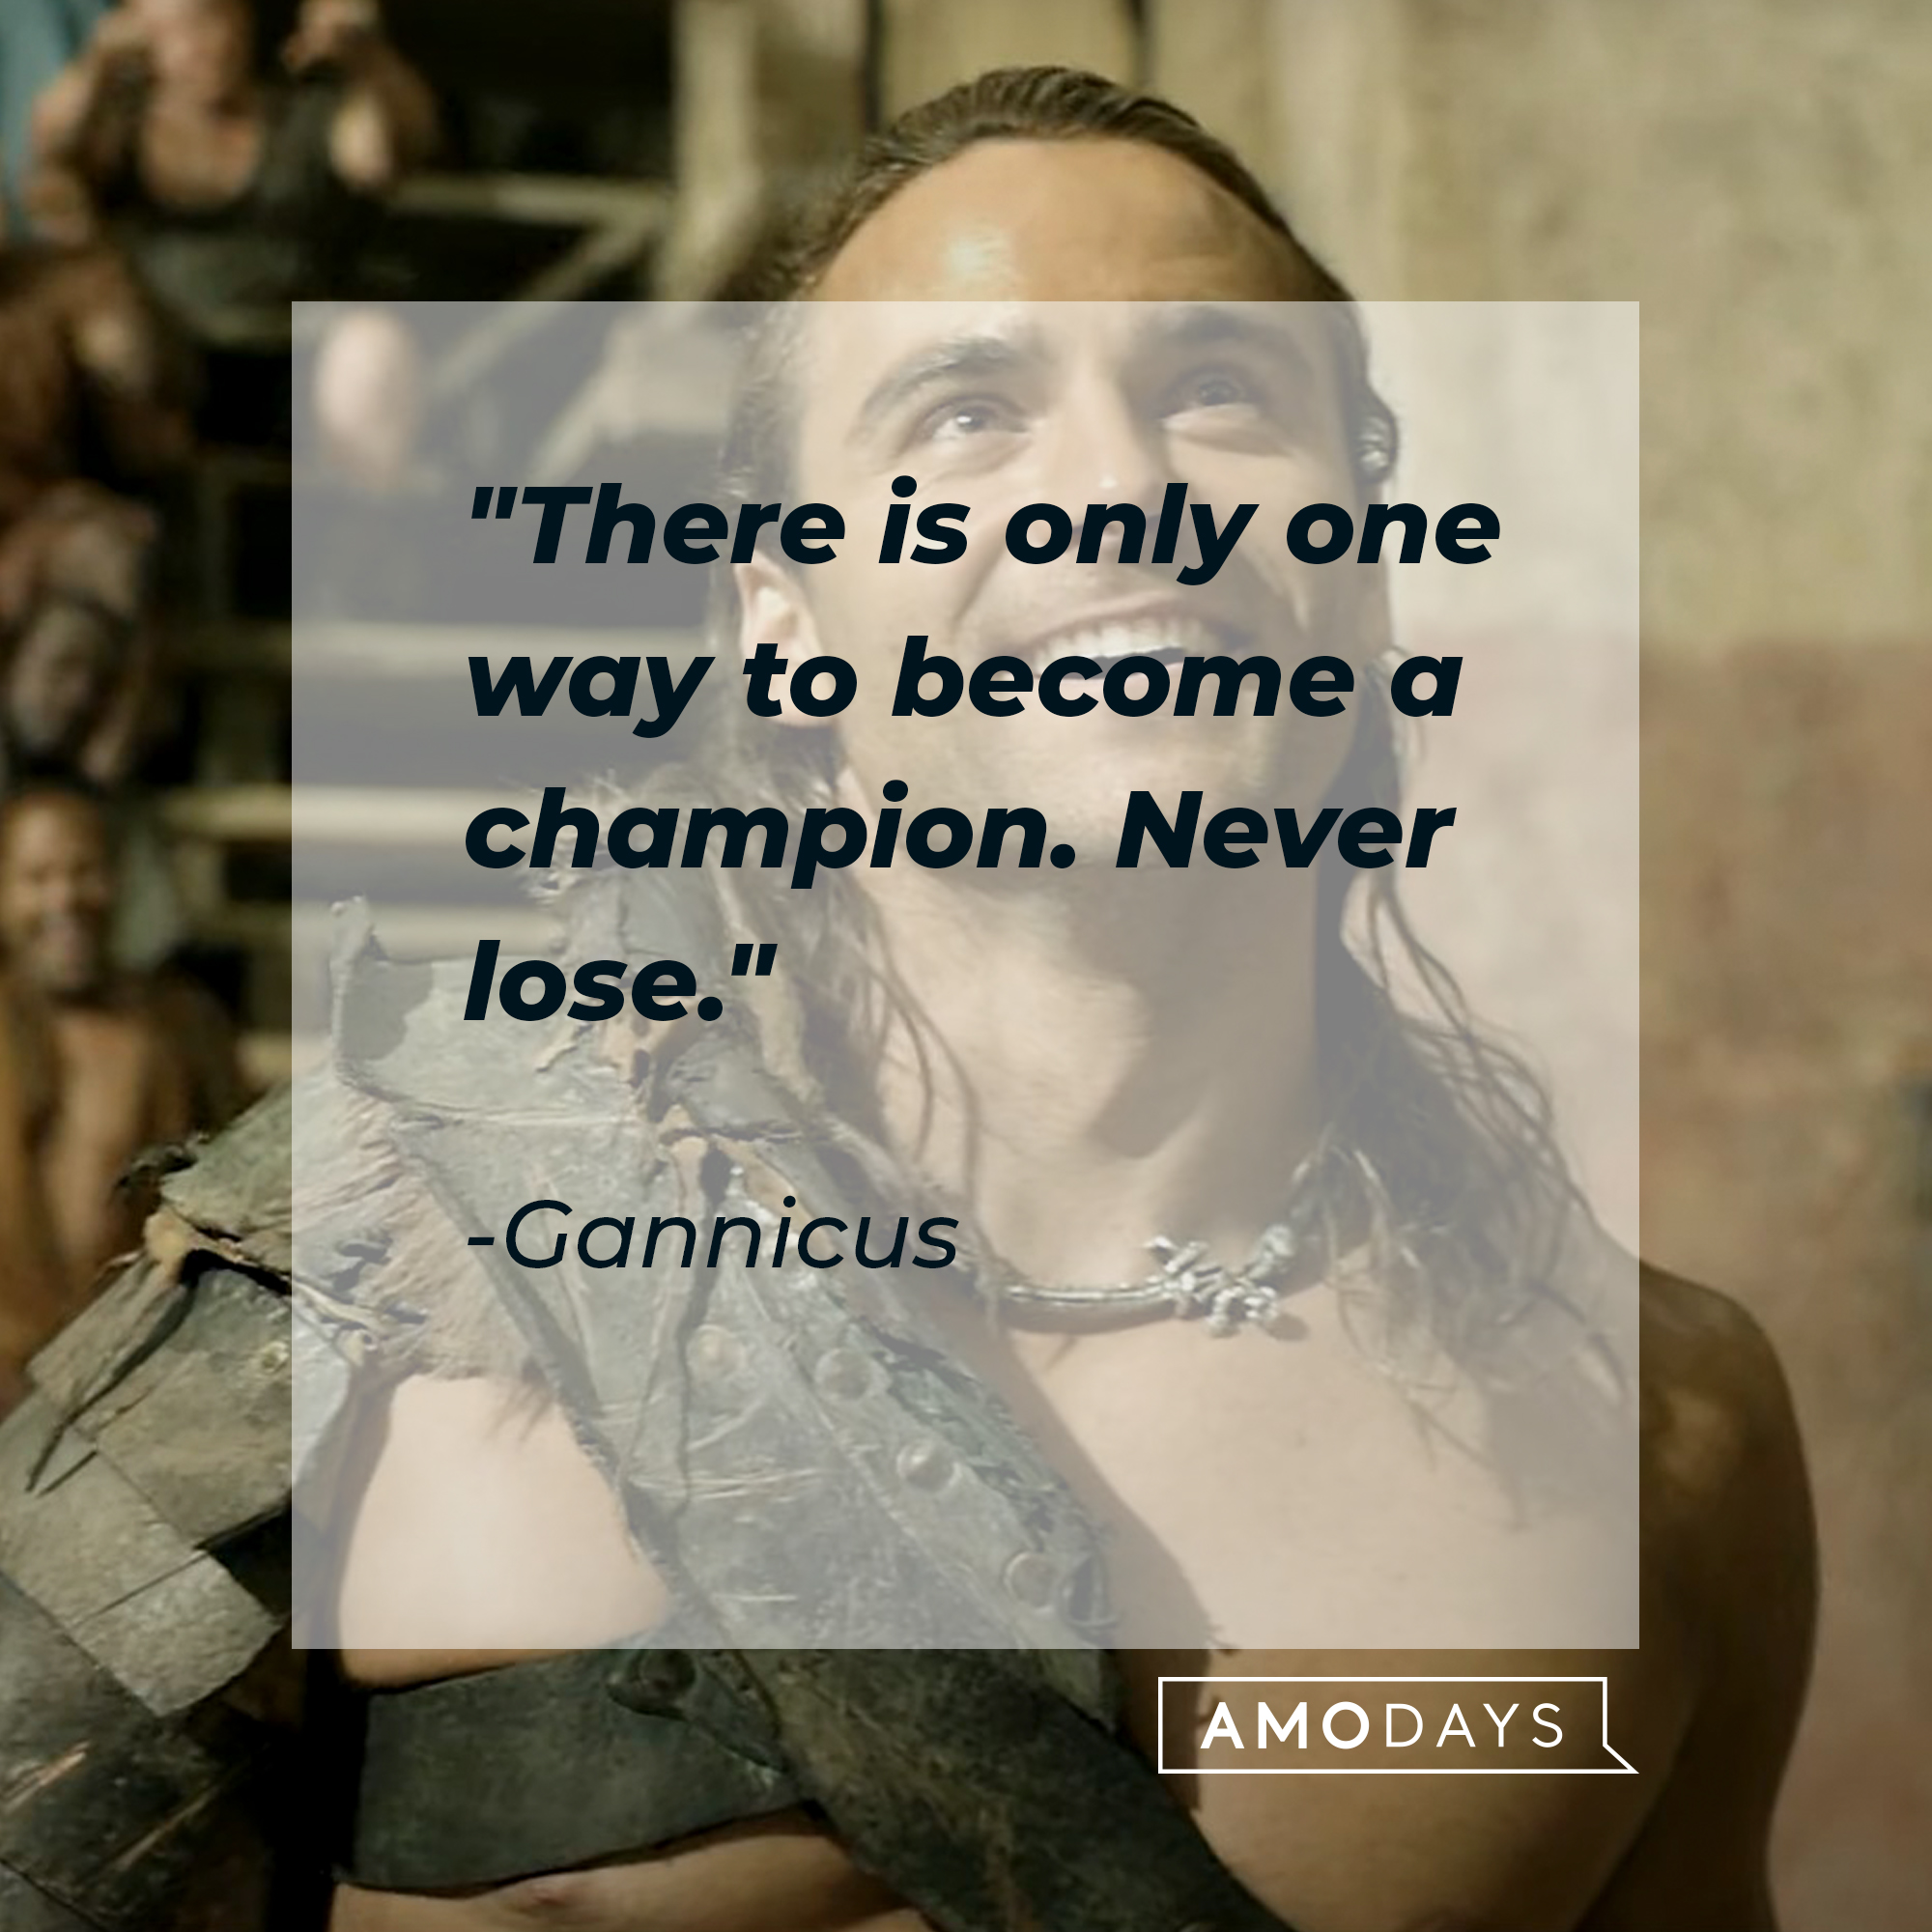 An image of the character Gannicus with his quote: "There is only one way to become a champion. Never lose." | Source: youtube.com/Starz